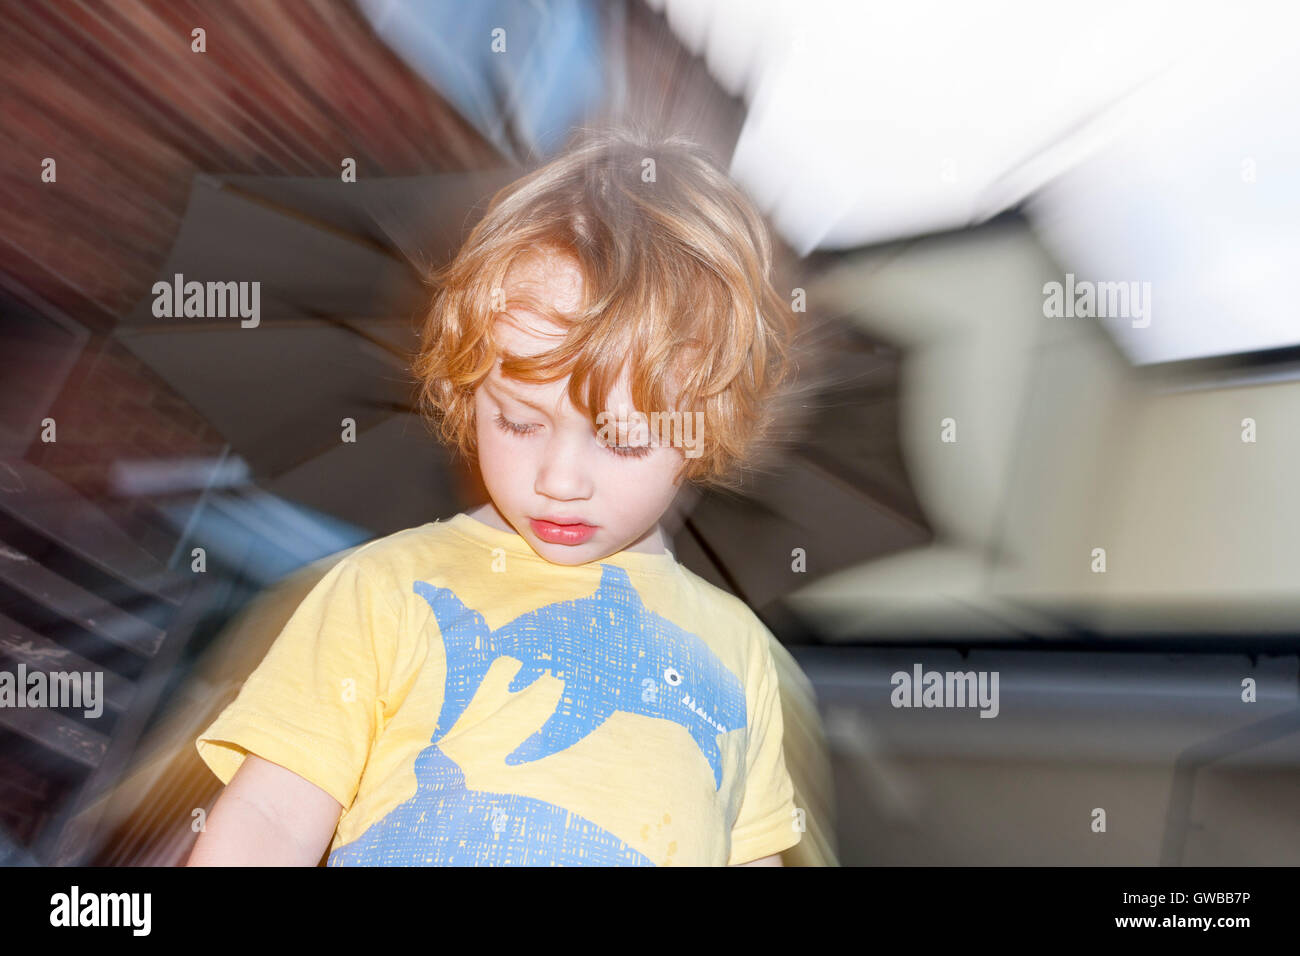 Image of a young 3-year old boy in the garden using slow-sync flash technique Stock Photo